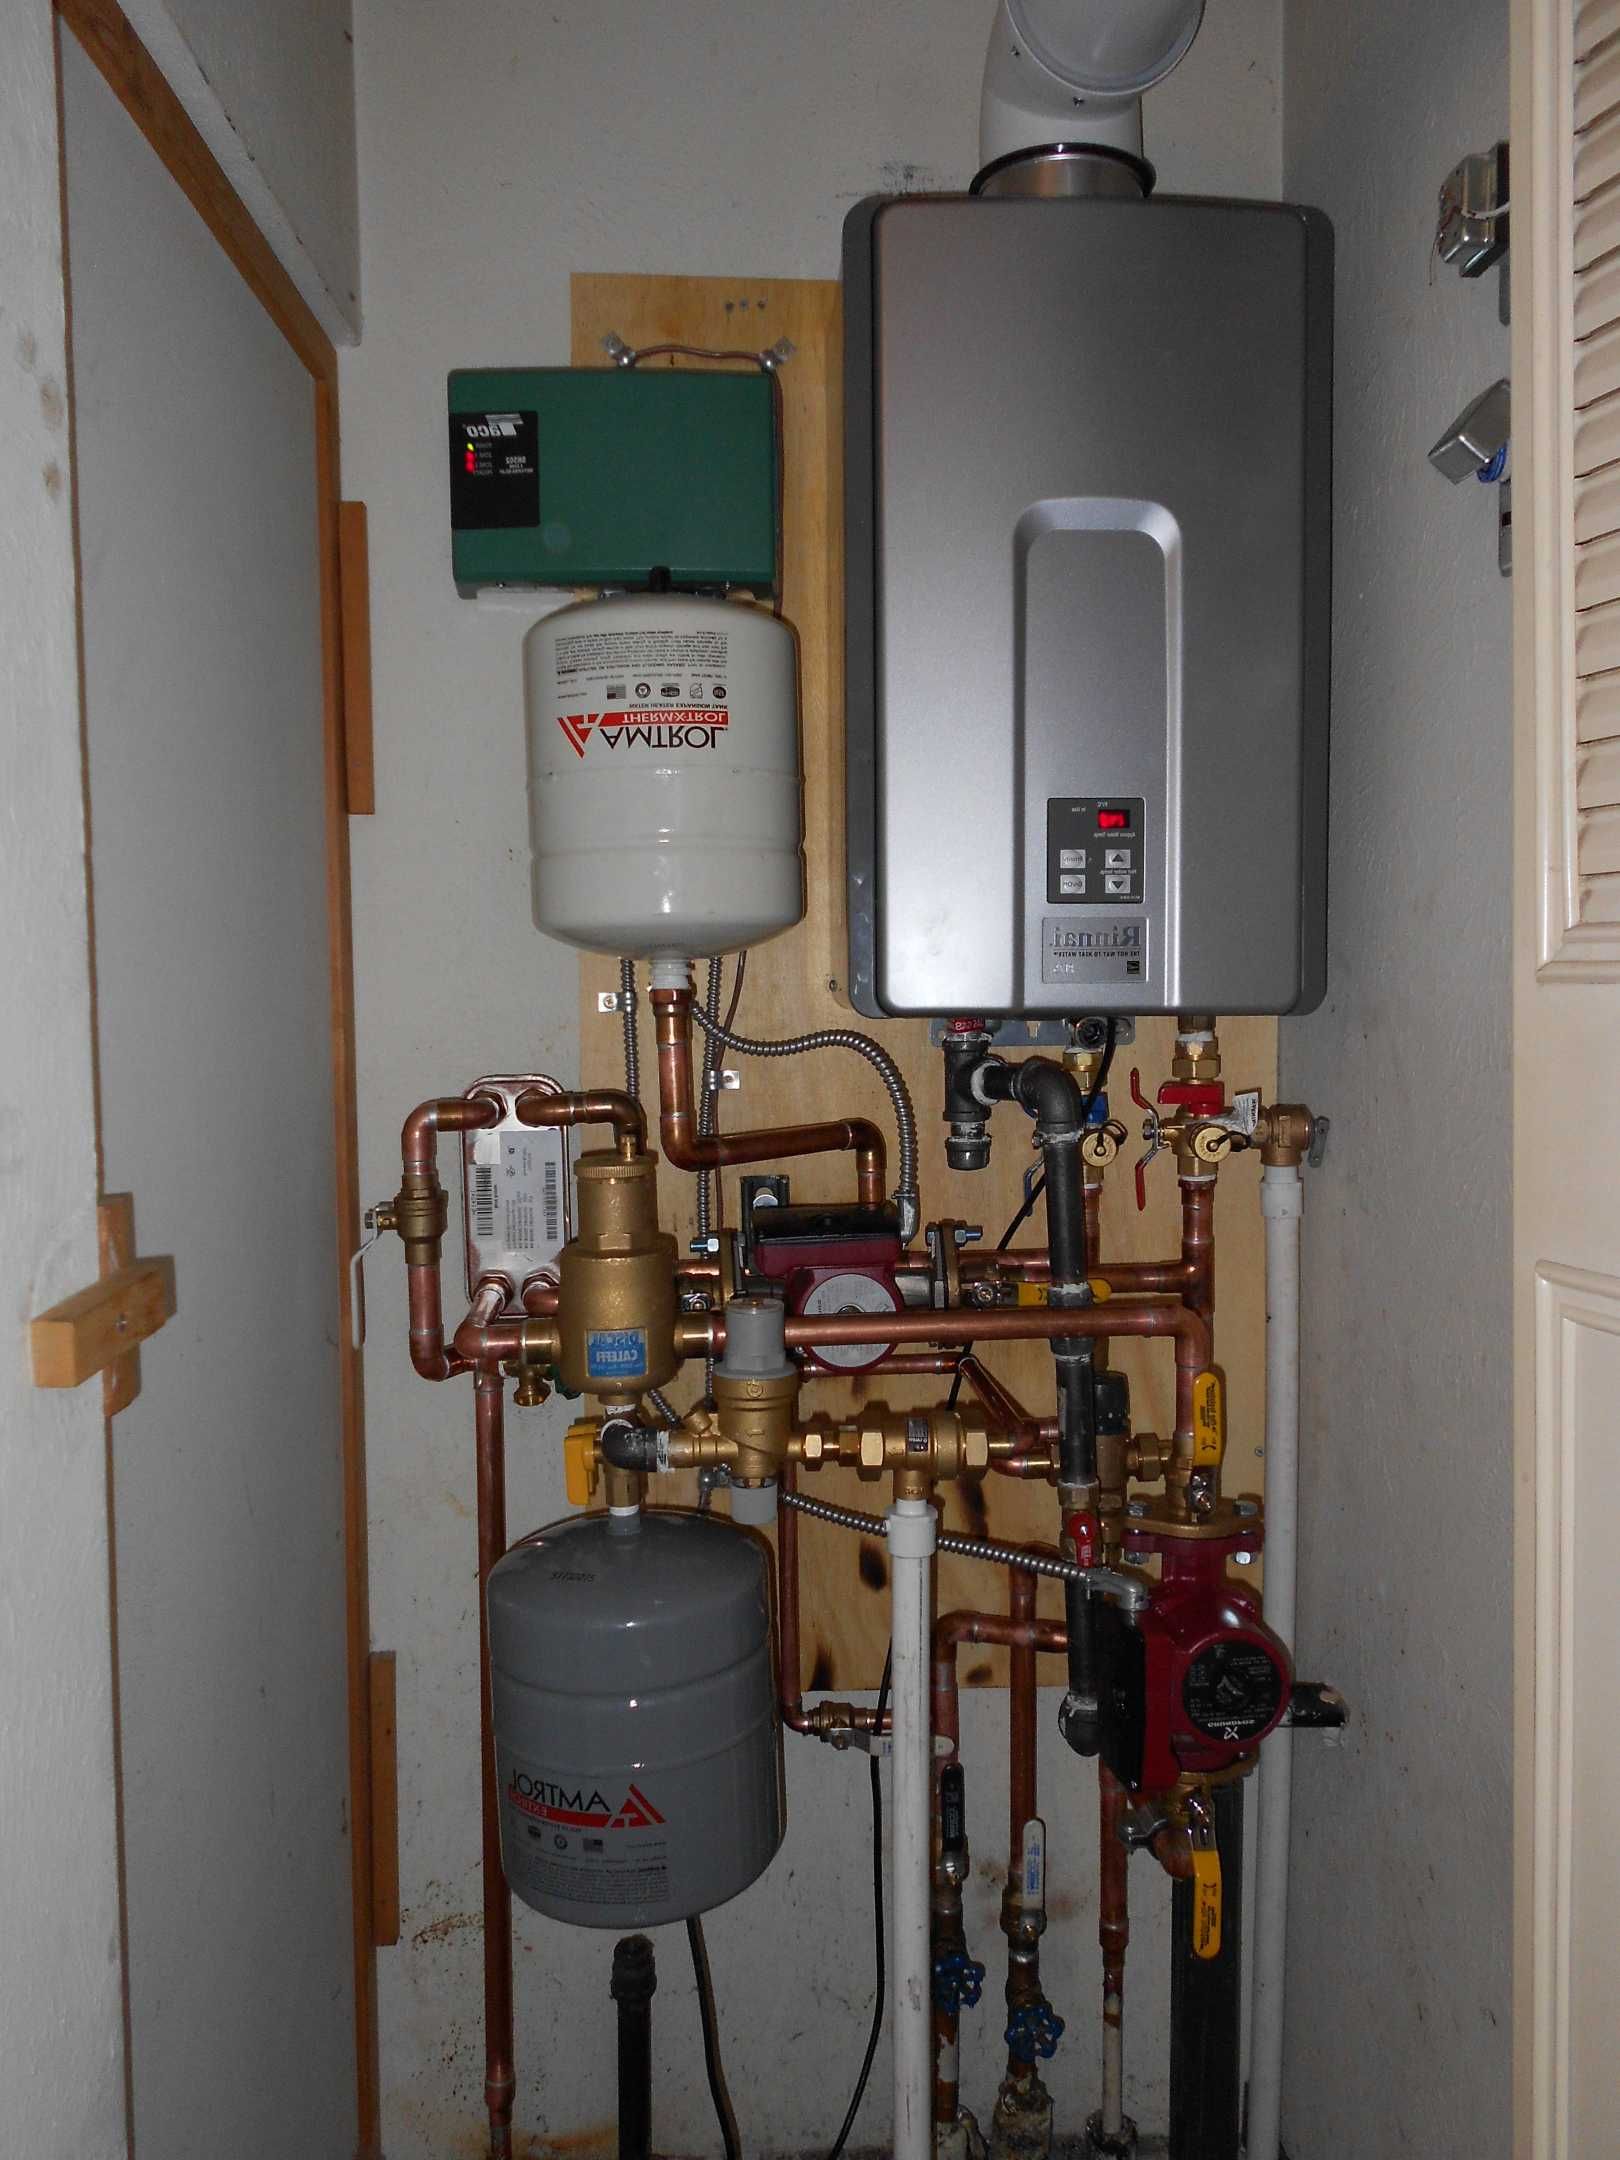 Unique Navien Hot Water Heater Reviews With Images Radiant